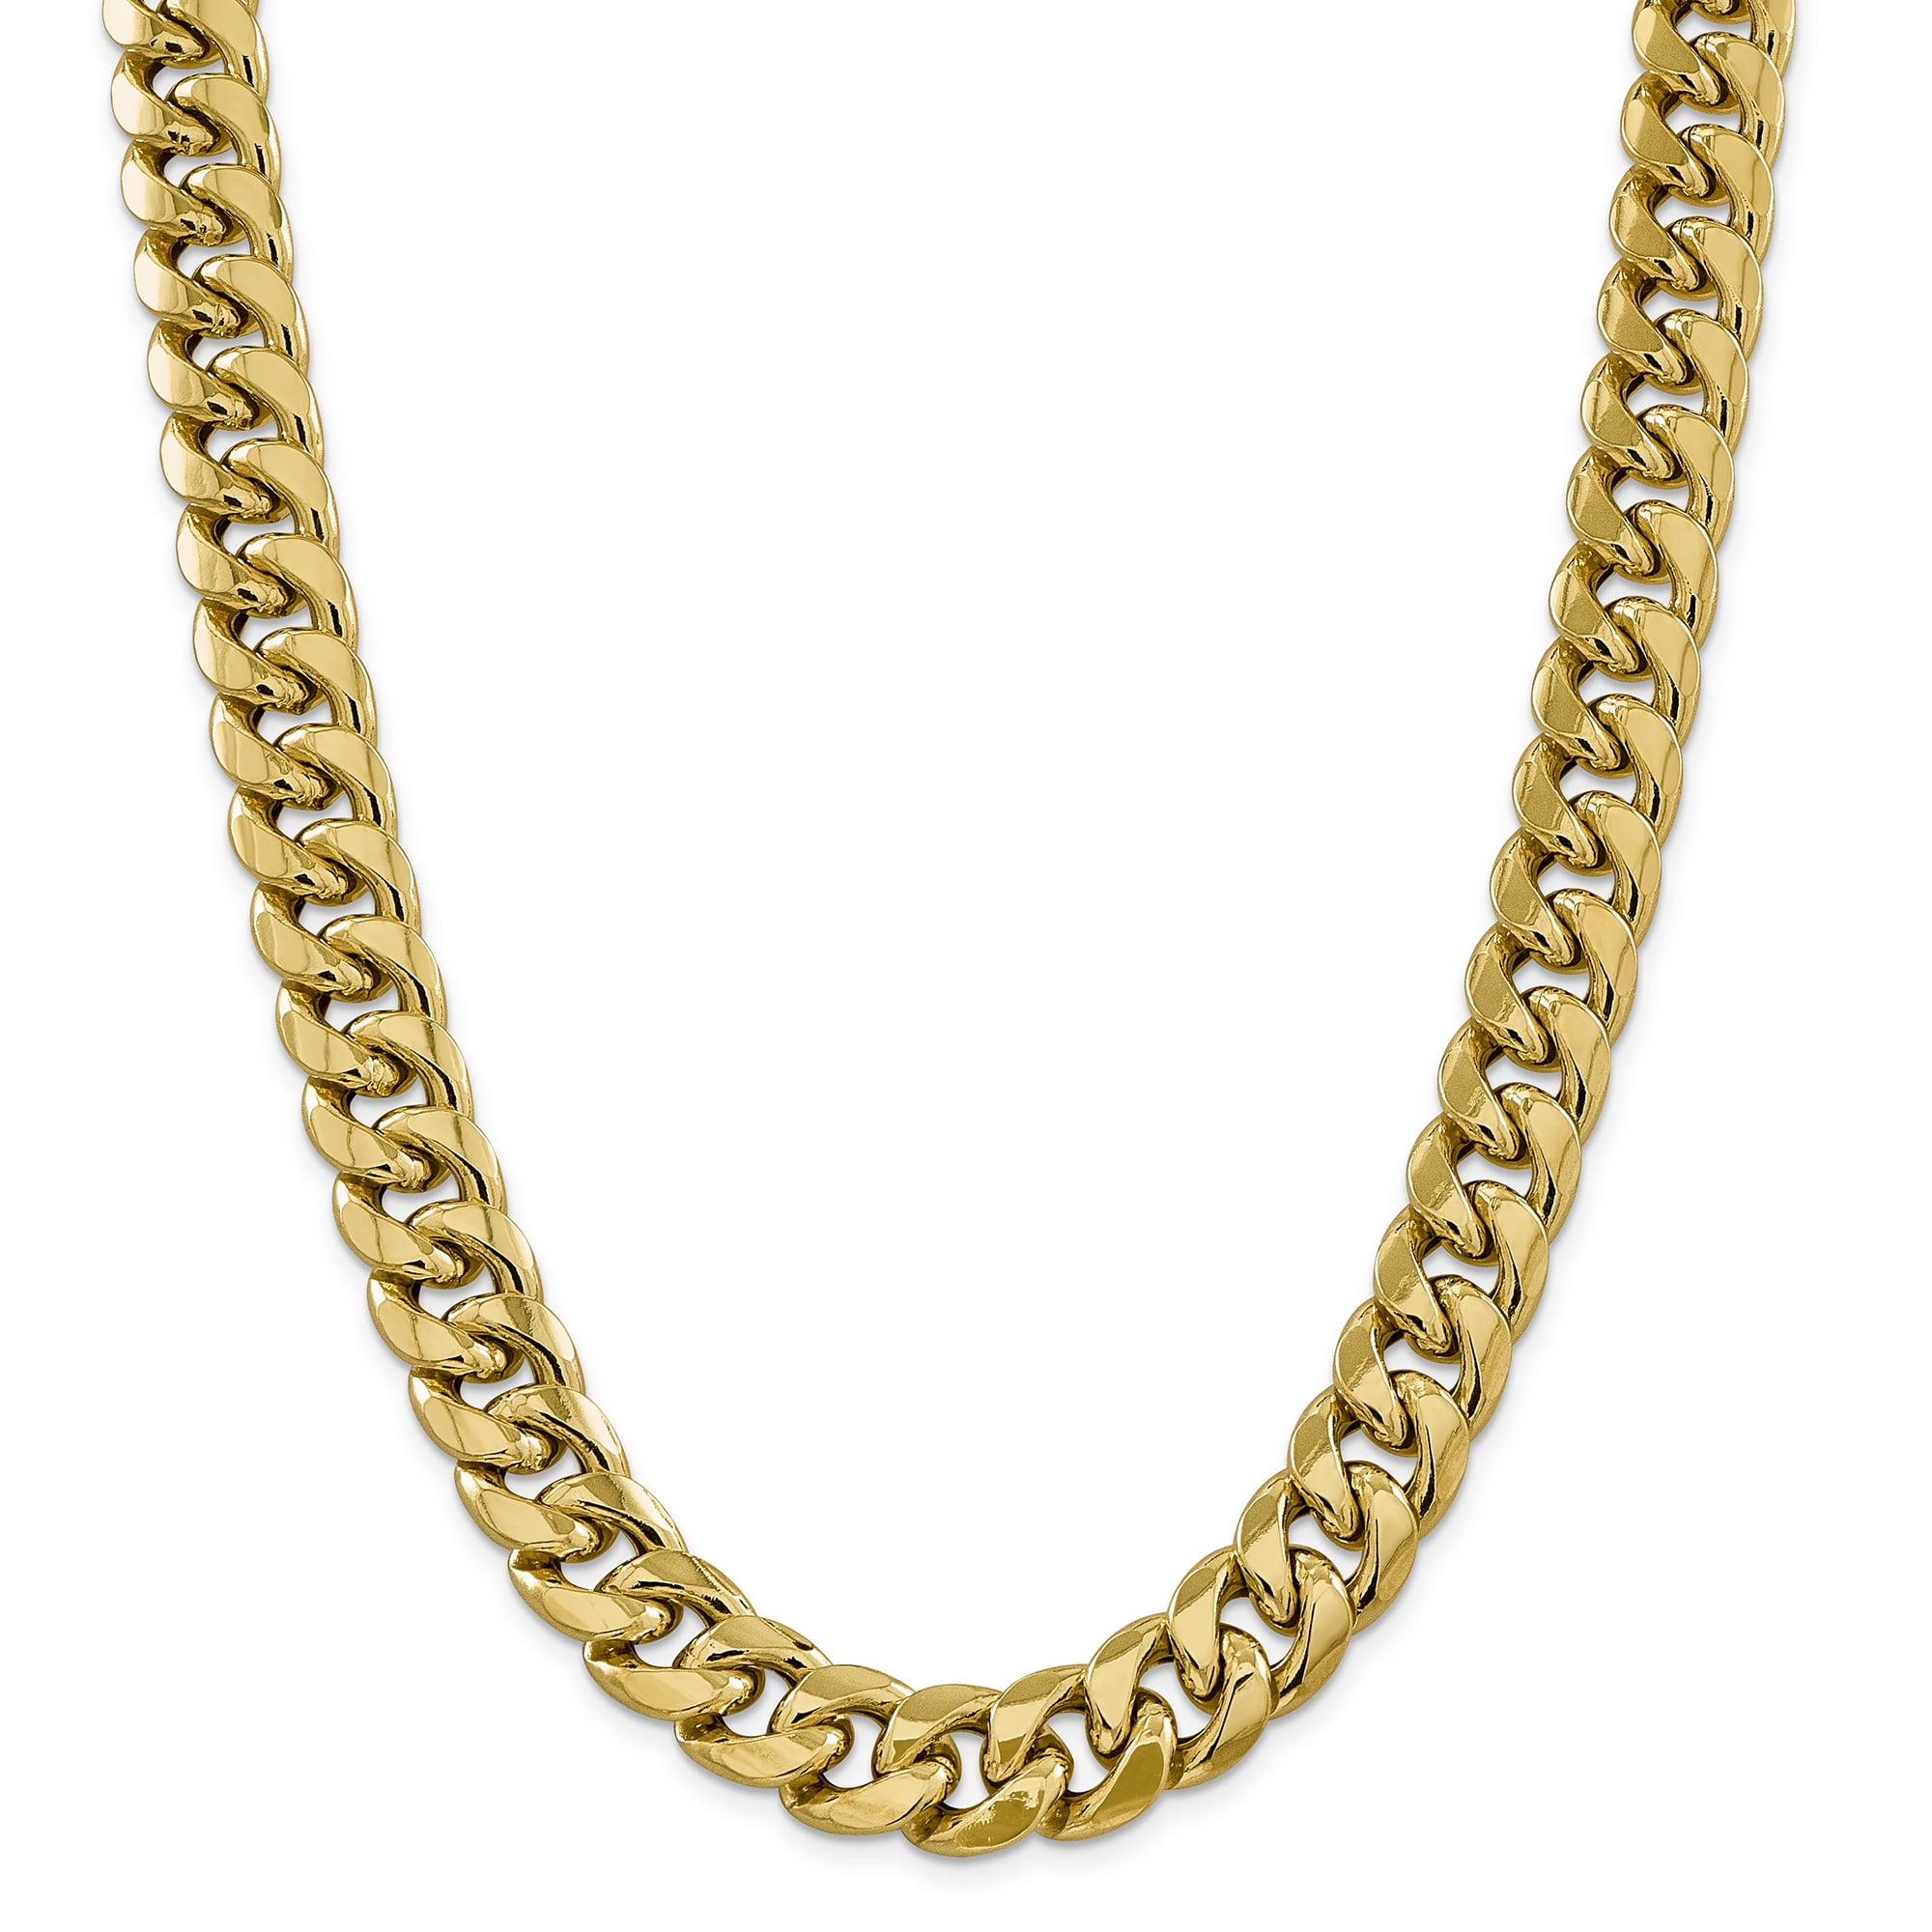 20 15mm 18 Unisex 11mm 24 30 Cuban Chain Necklace in Gold Tone 13mm